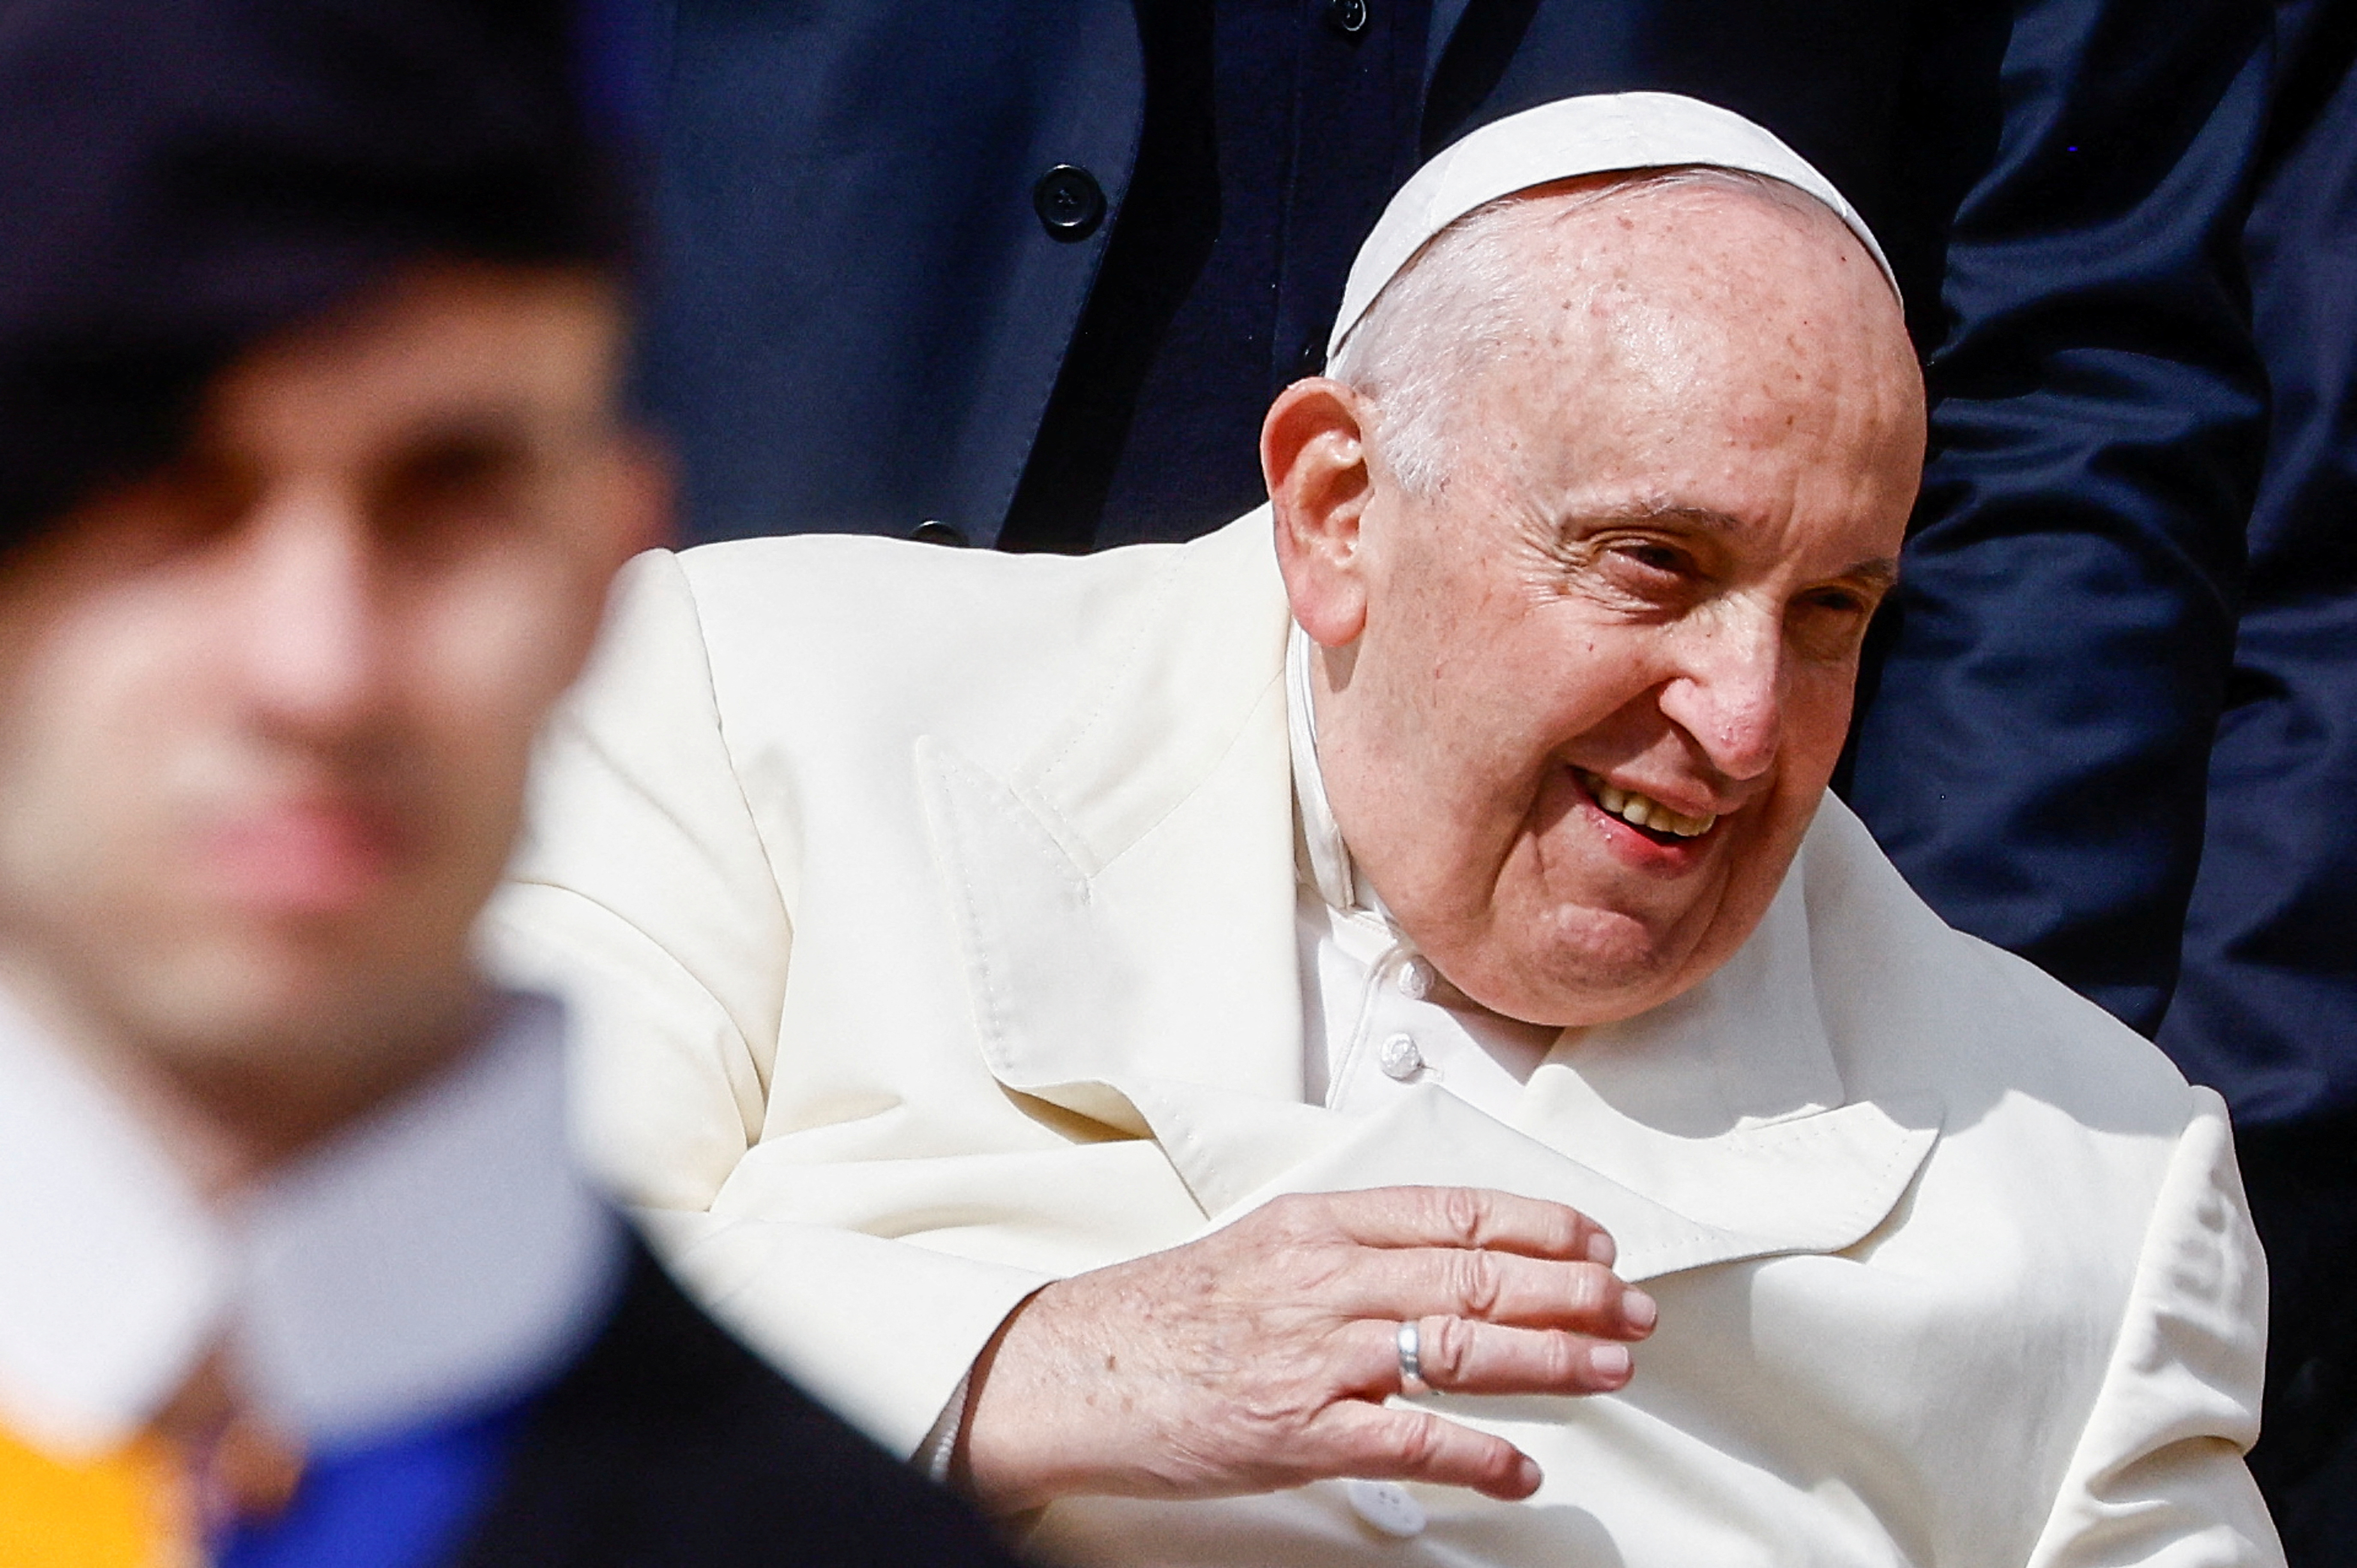 Paron Seex - Sex is a 'beautiful thing', Pope says in documentary | Reuters